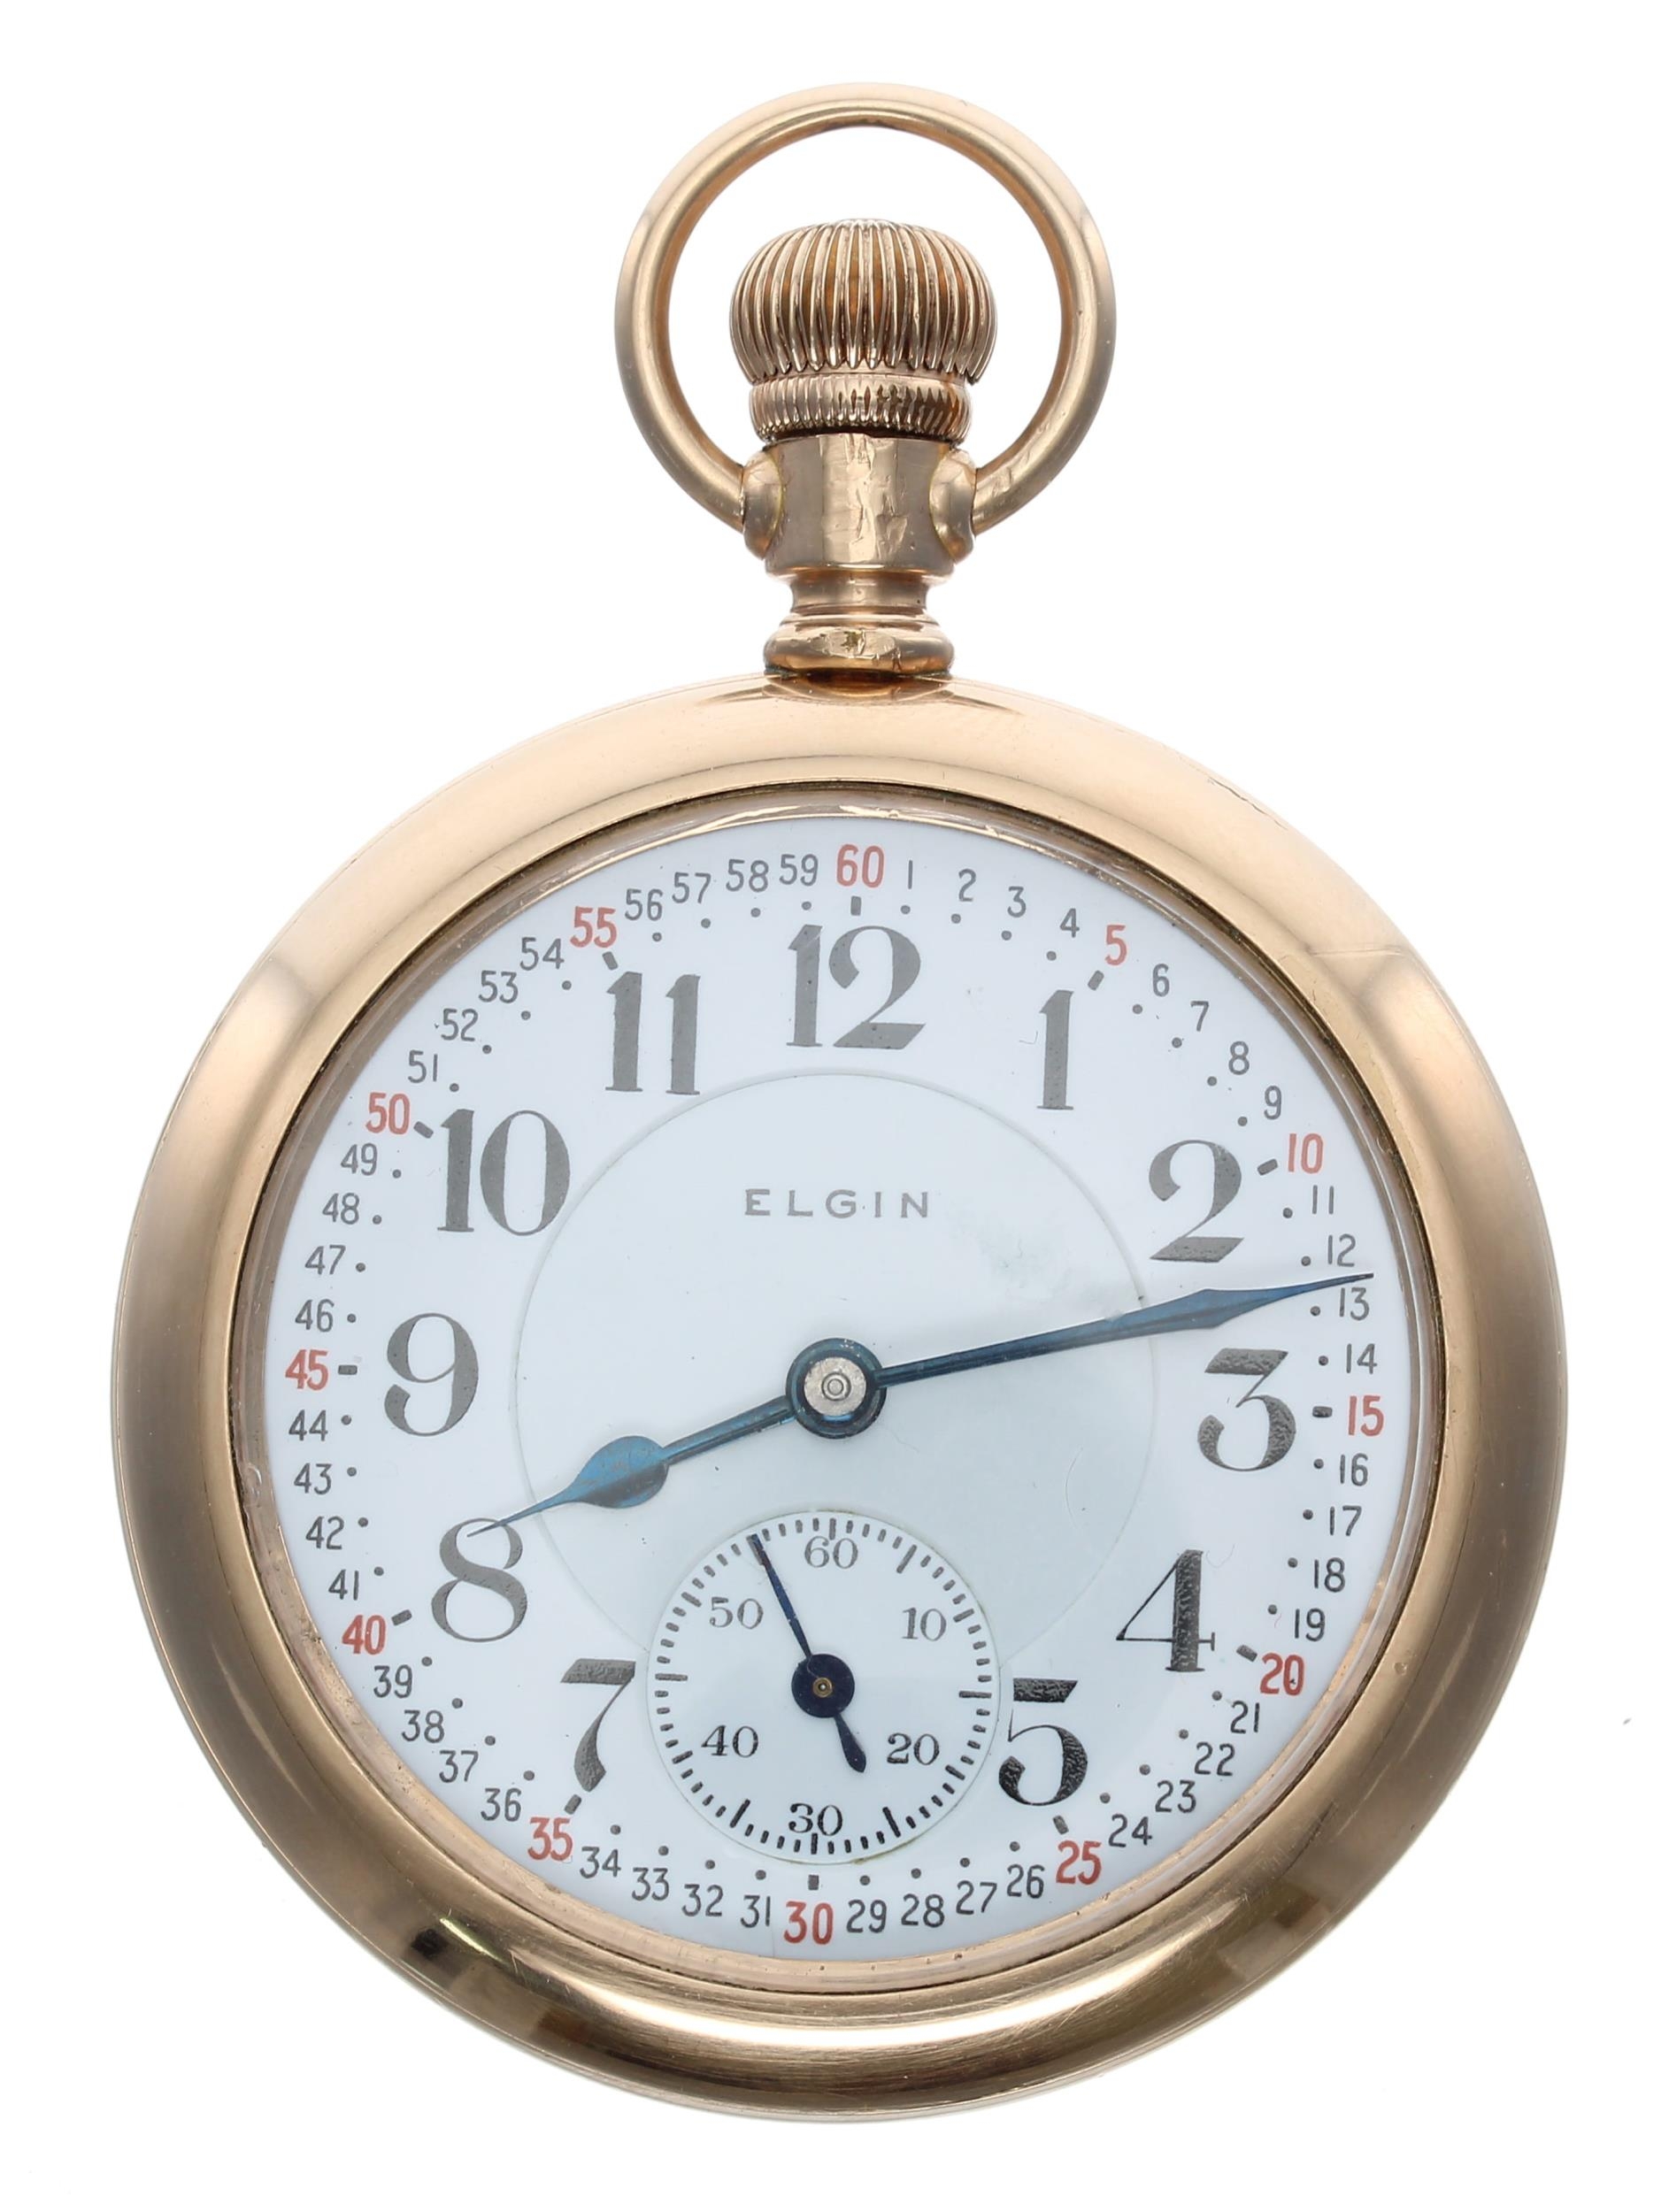 Elgin National Watch Co. 'Veritas' gold plated lever set pocket watch, circa 1909, signed 23 jewel - Image 2 of 4